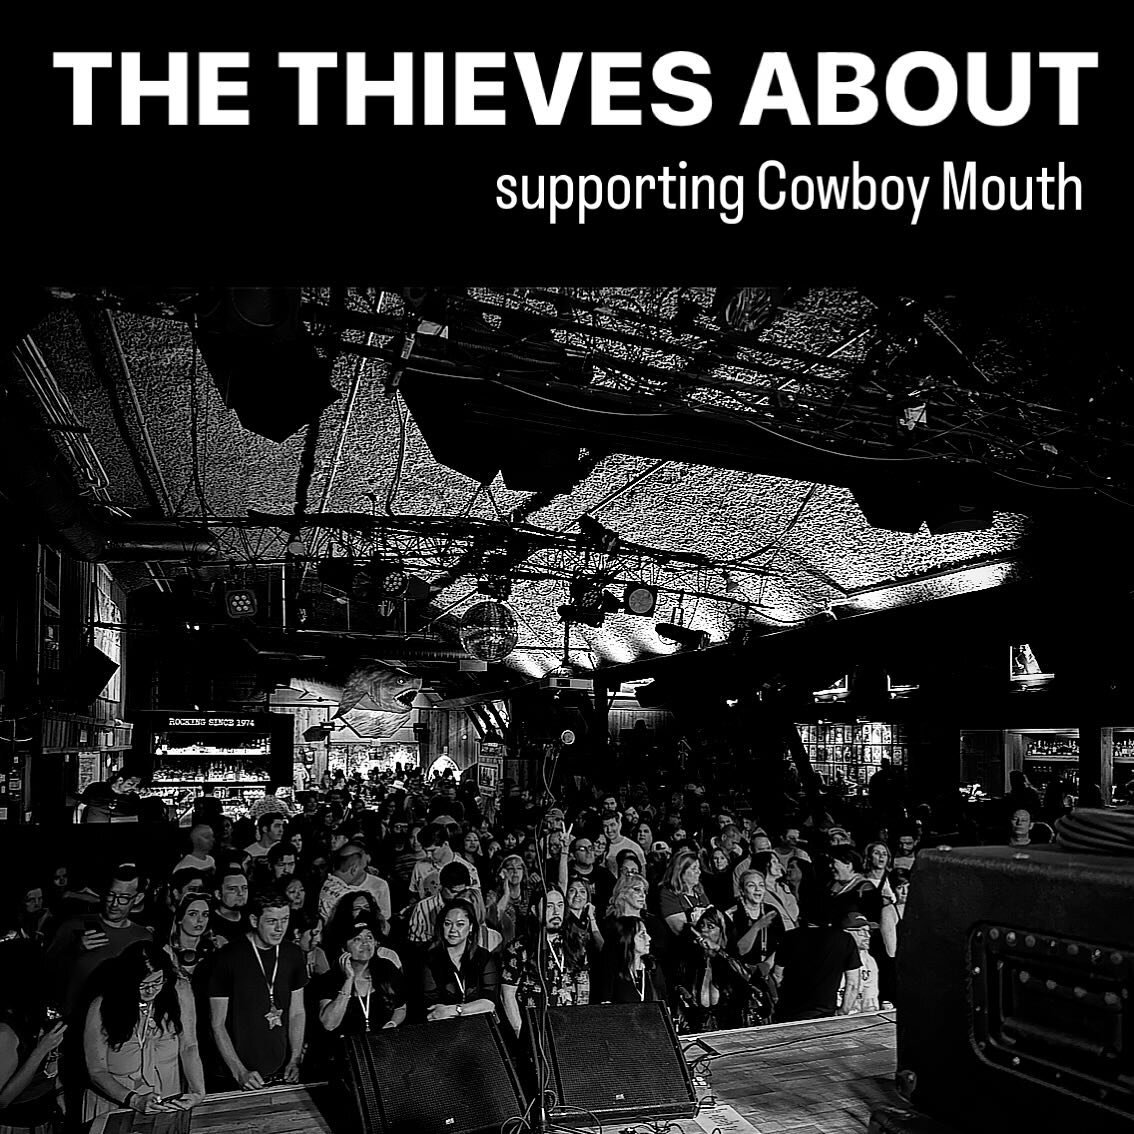 This Sunday, January 28th with Cowboy Mouth. 
Doors 7. Show 7:30
.
.
.
#thethievesabout #alternativerock #altrock #sandiegomusicscene #livemusic #supportyourlocalband @bellyuptavern @cowboymouthofficial